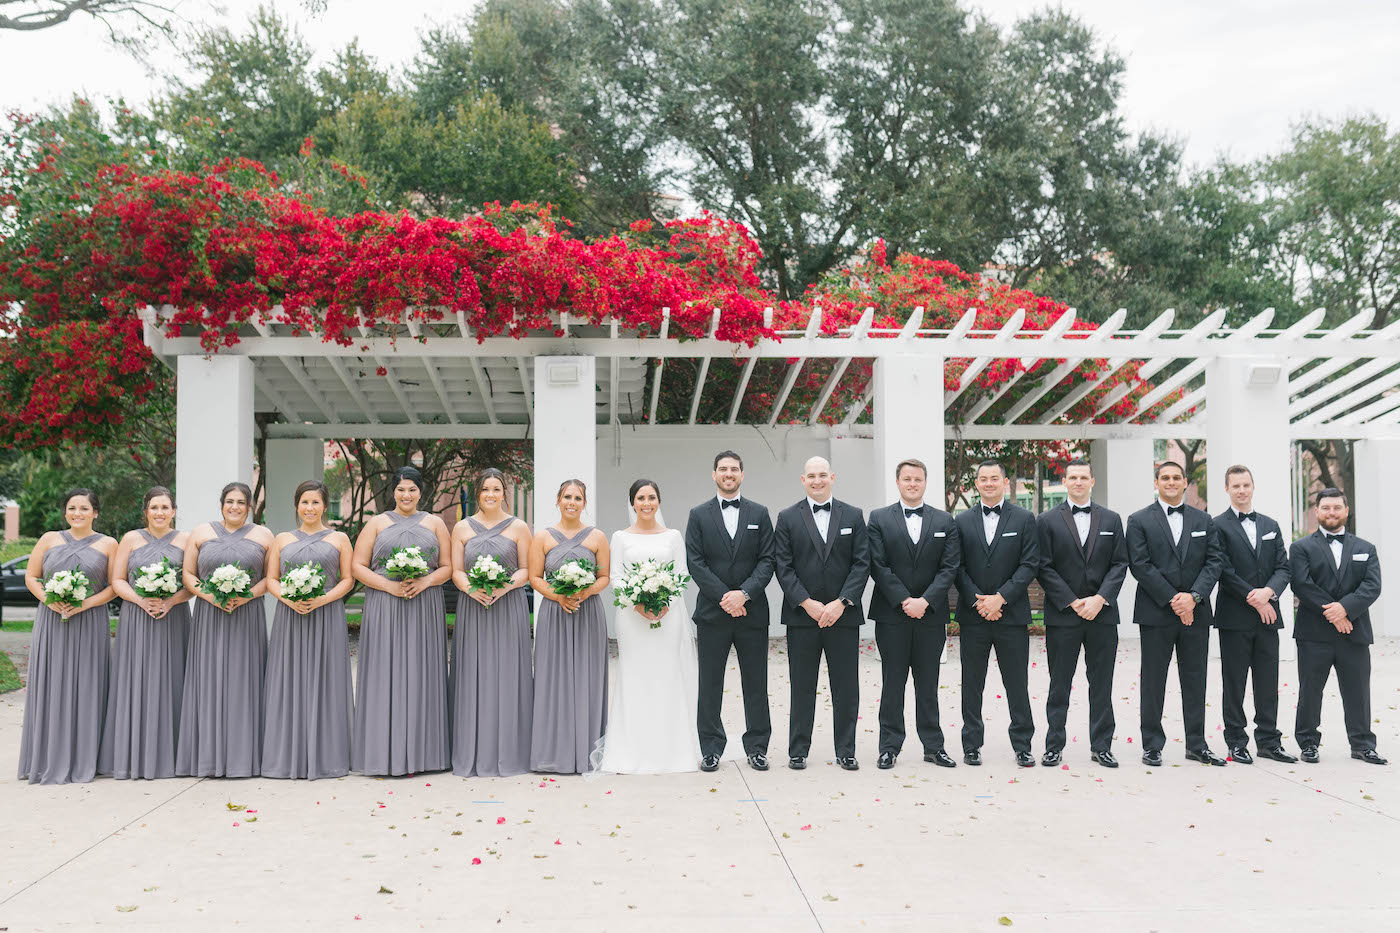 Florida Wedding Party Portrait, Classic Groomsmen in Black Tuxedos, Bridesmaids Wearing Matching Long Dark Slate Gray Watters Dresses, Bride Wearing Timeless White Mikaella Bridal Wedding Dress, Holding Ivory and White Floral Bouquet | Tampa Bay Wedding Planner Parties A'La Carte | Downtown St. Pete Wedding Florist Bruce Wayne Florals